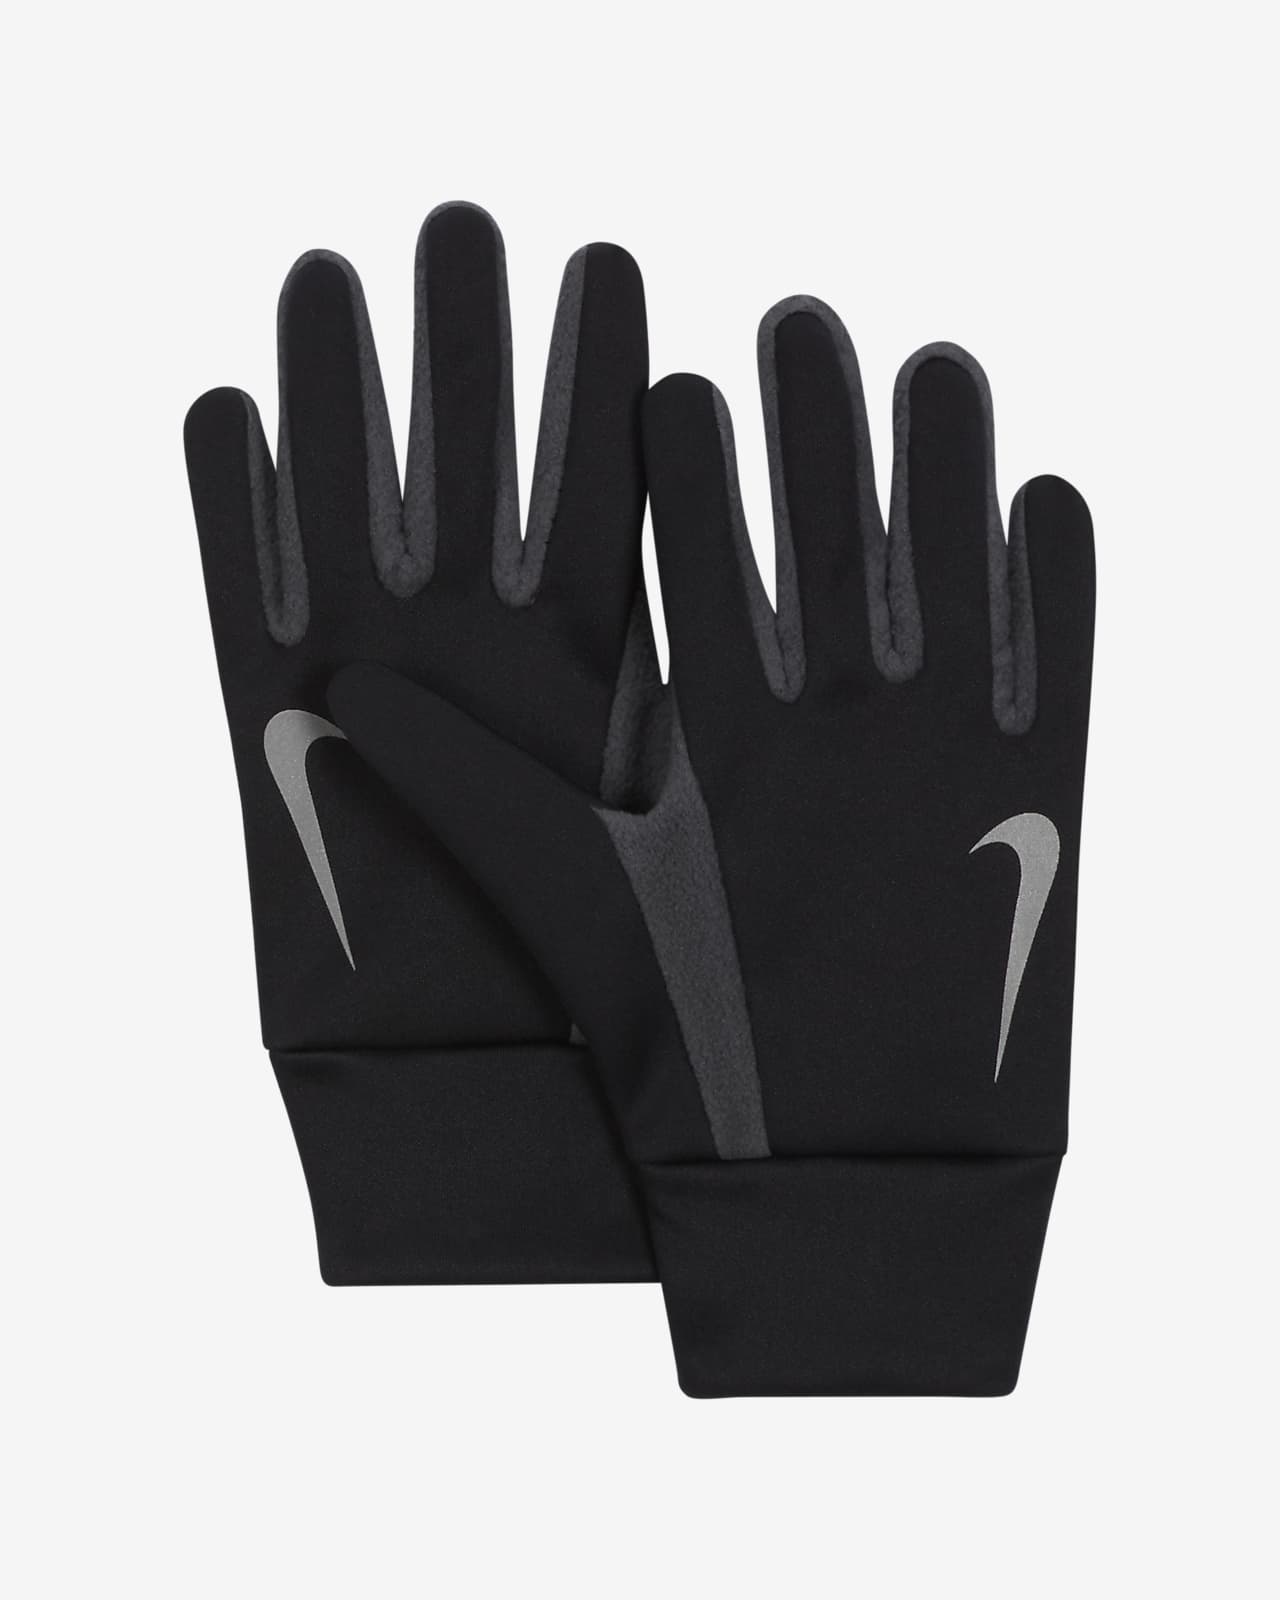 nike running gloves and hat